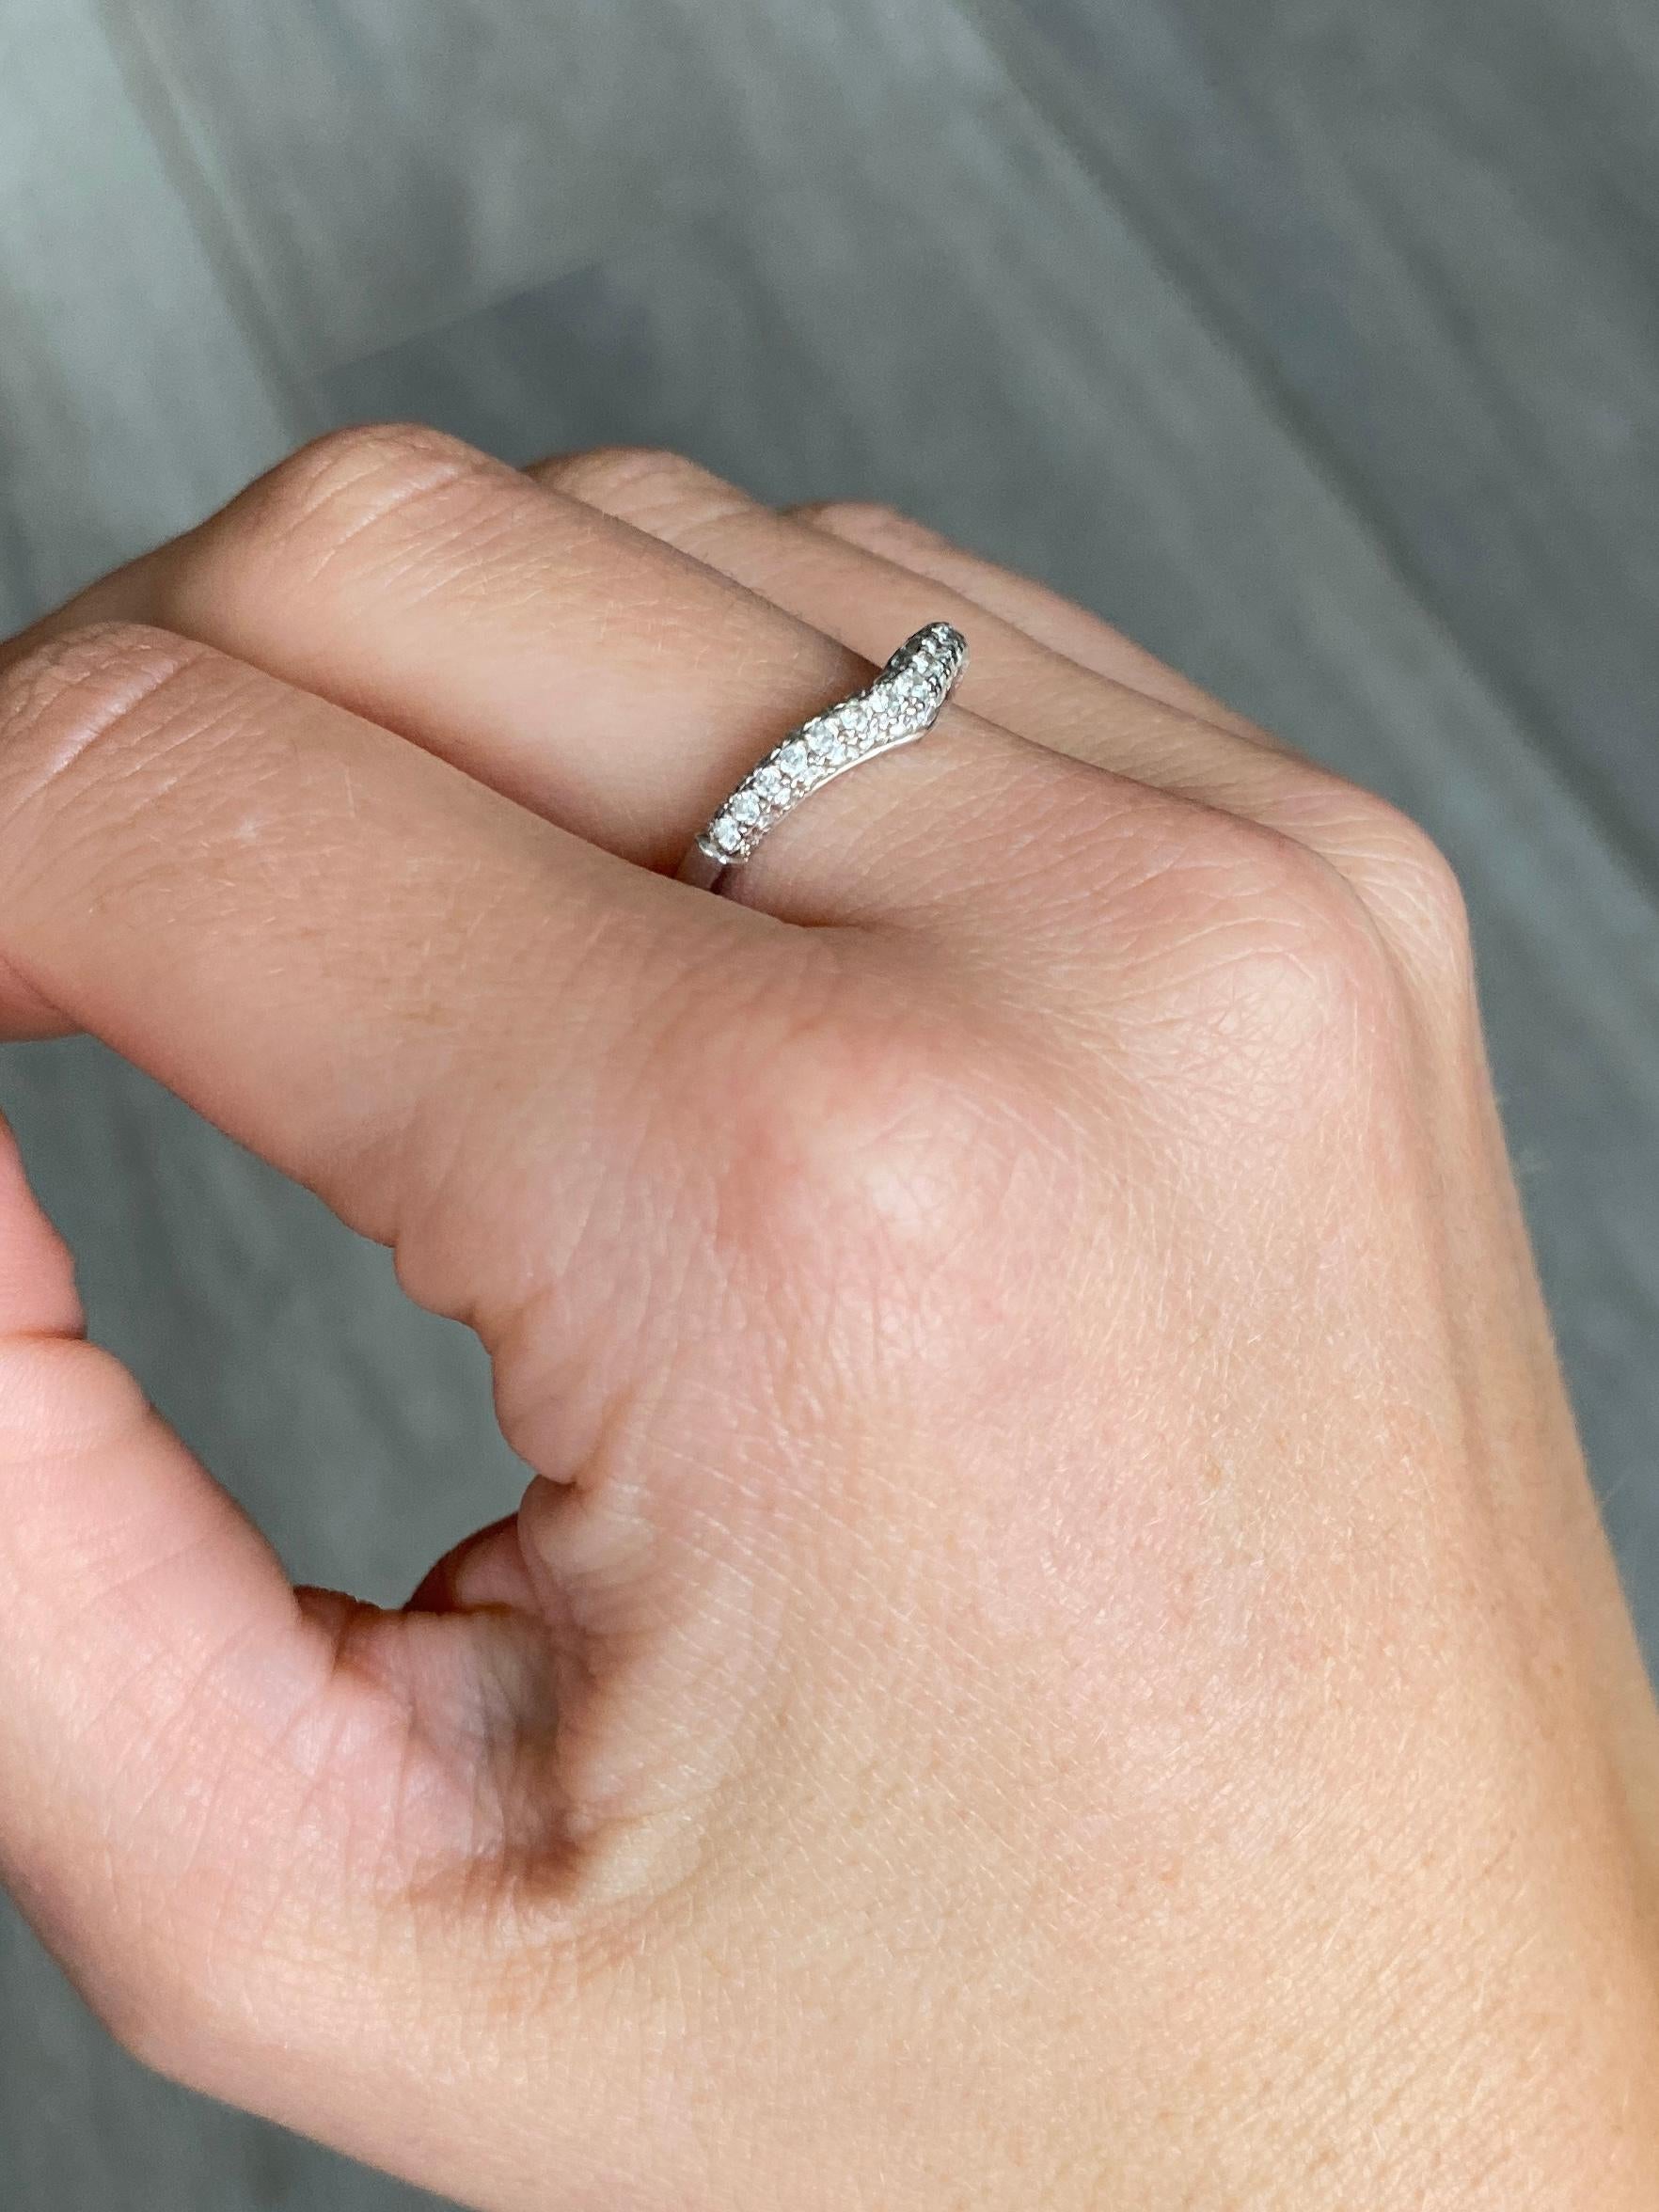 This stylish wave ring is modelled in 18carat white gold and is encrusted with sparking diamonds totalling 45pts.

Ring Size: N or 6 3/4 
Band Width: 3.5mm

Weight: 2.7g